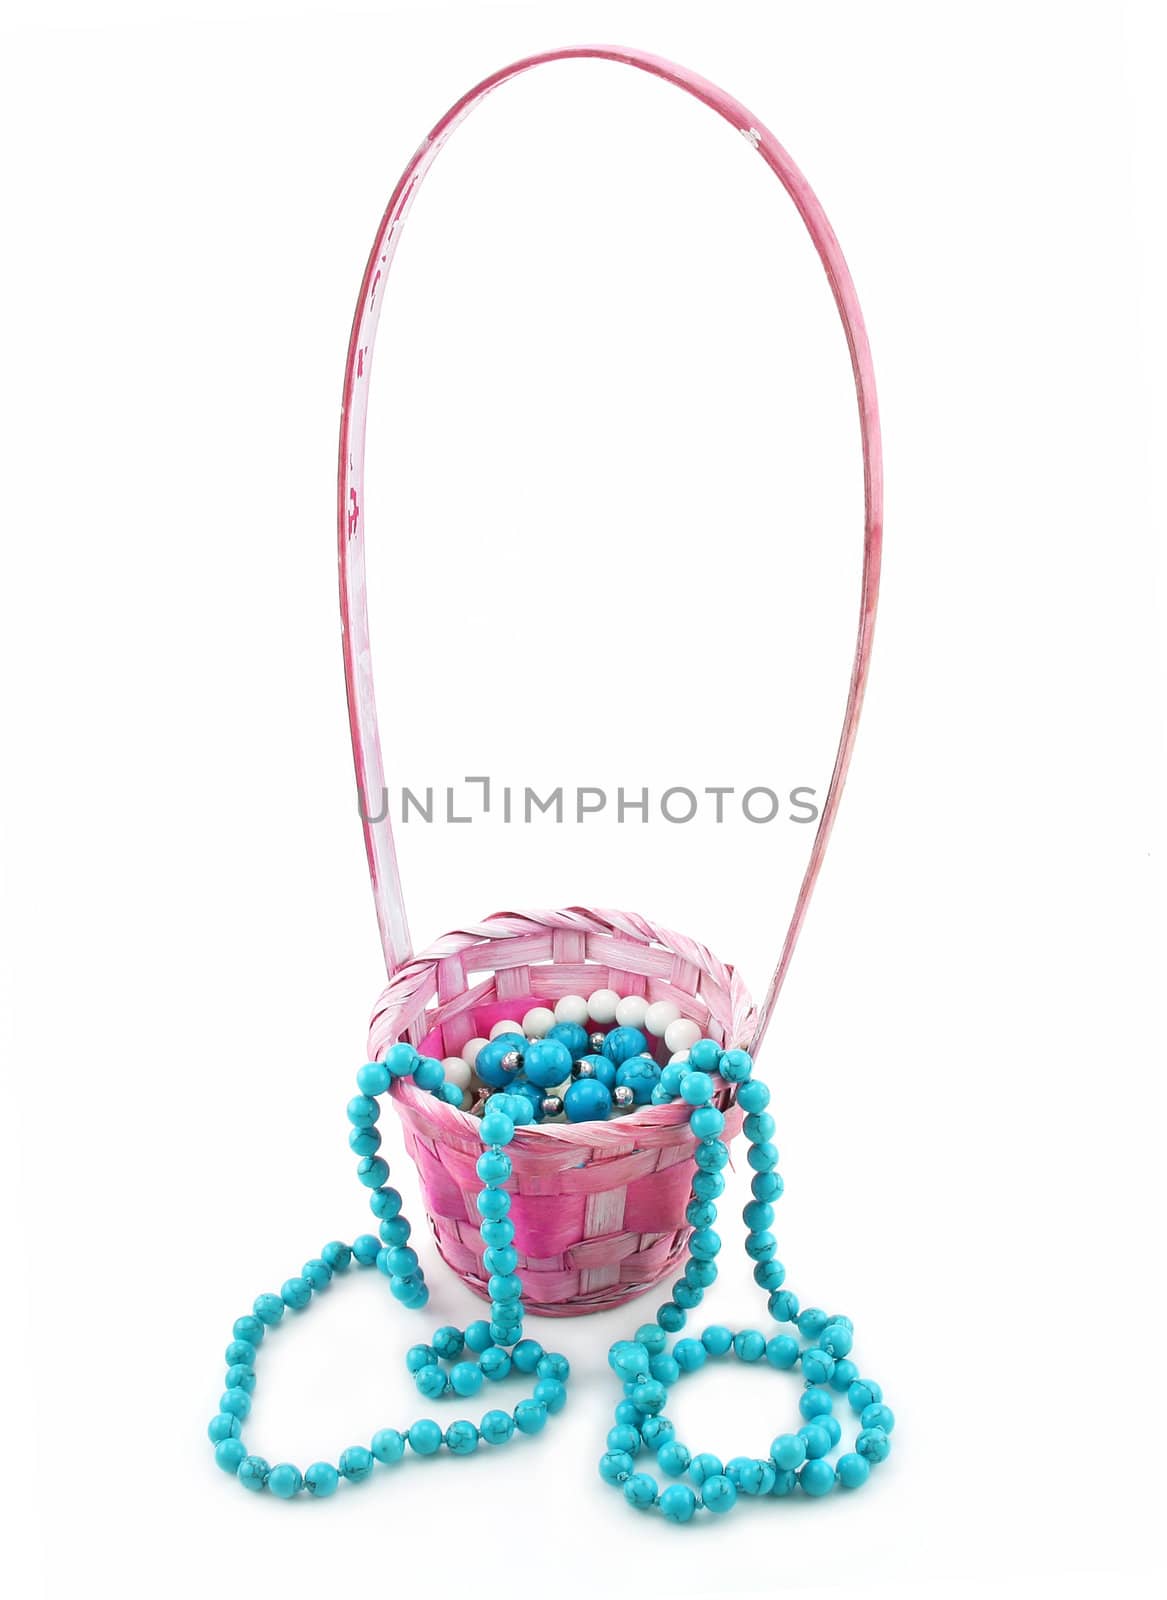 Colored Pearl Beads in Pink Wicker Basket Isolated on White Background